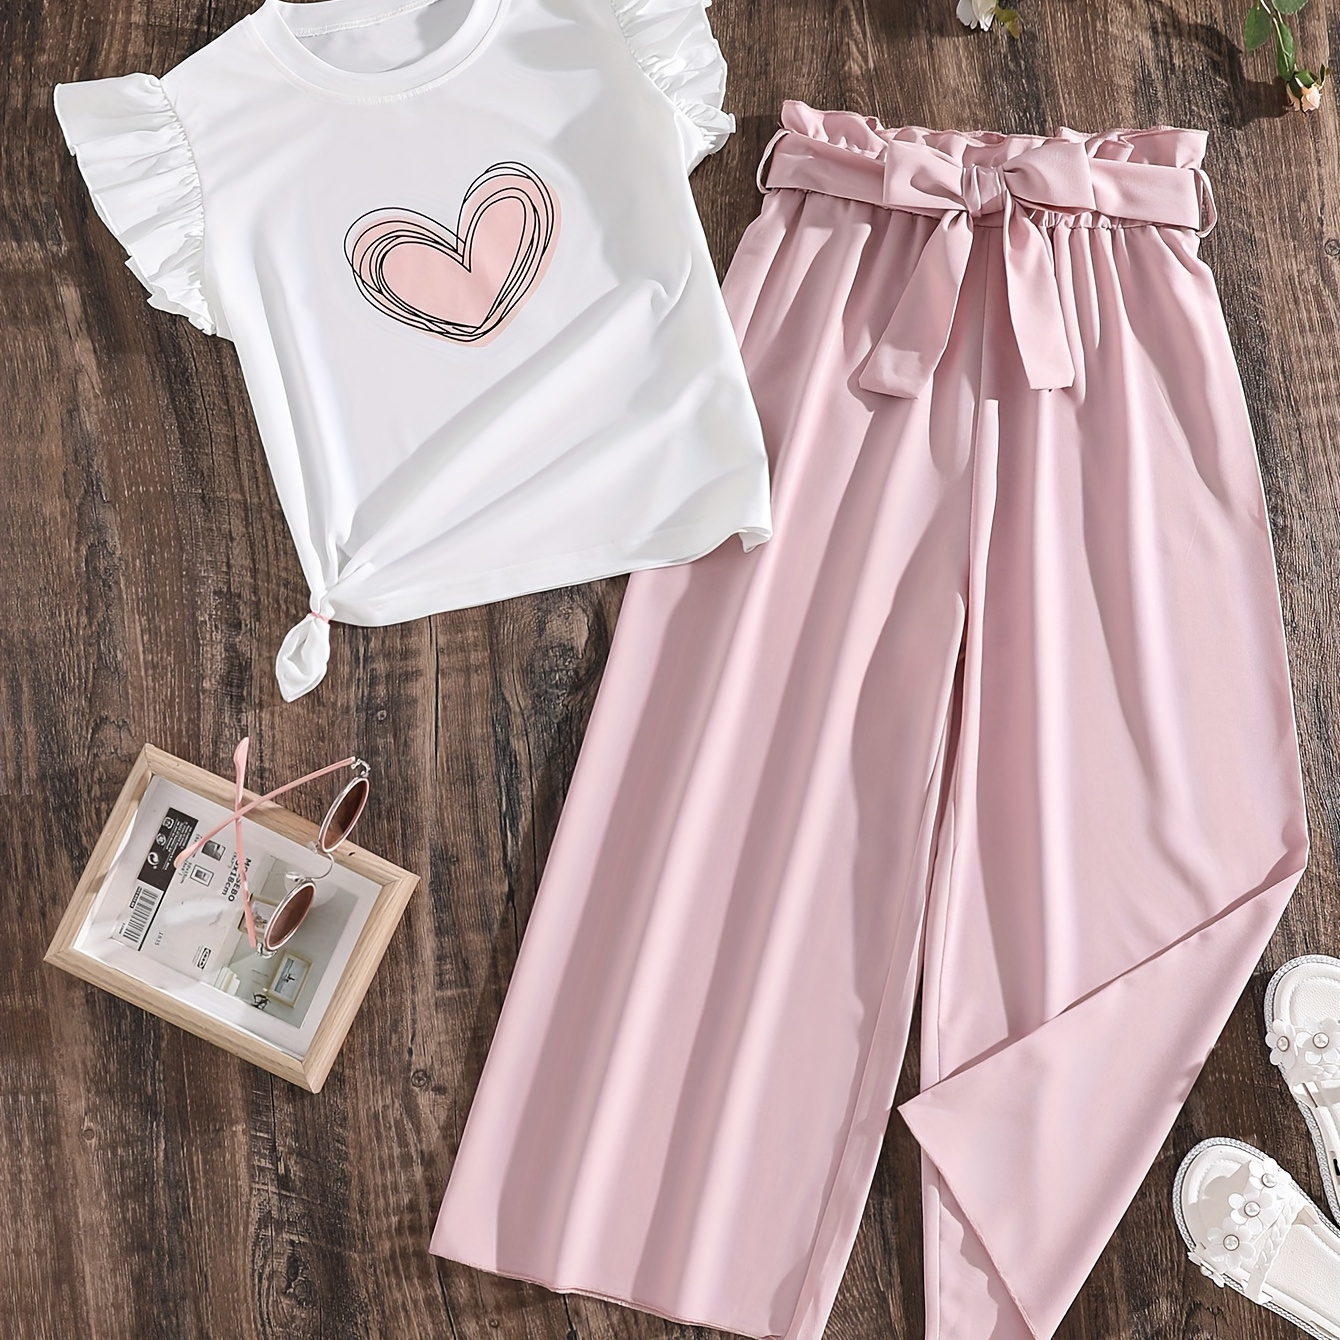 

2pcs, Heart Graphic Frill Trim Short Sleeve Crew Neck T-shirt + Solid Color Pants With Belt Set For Girls, Comfy And Trendy Summer Outfit